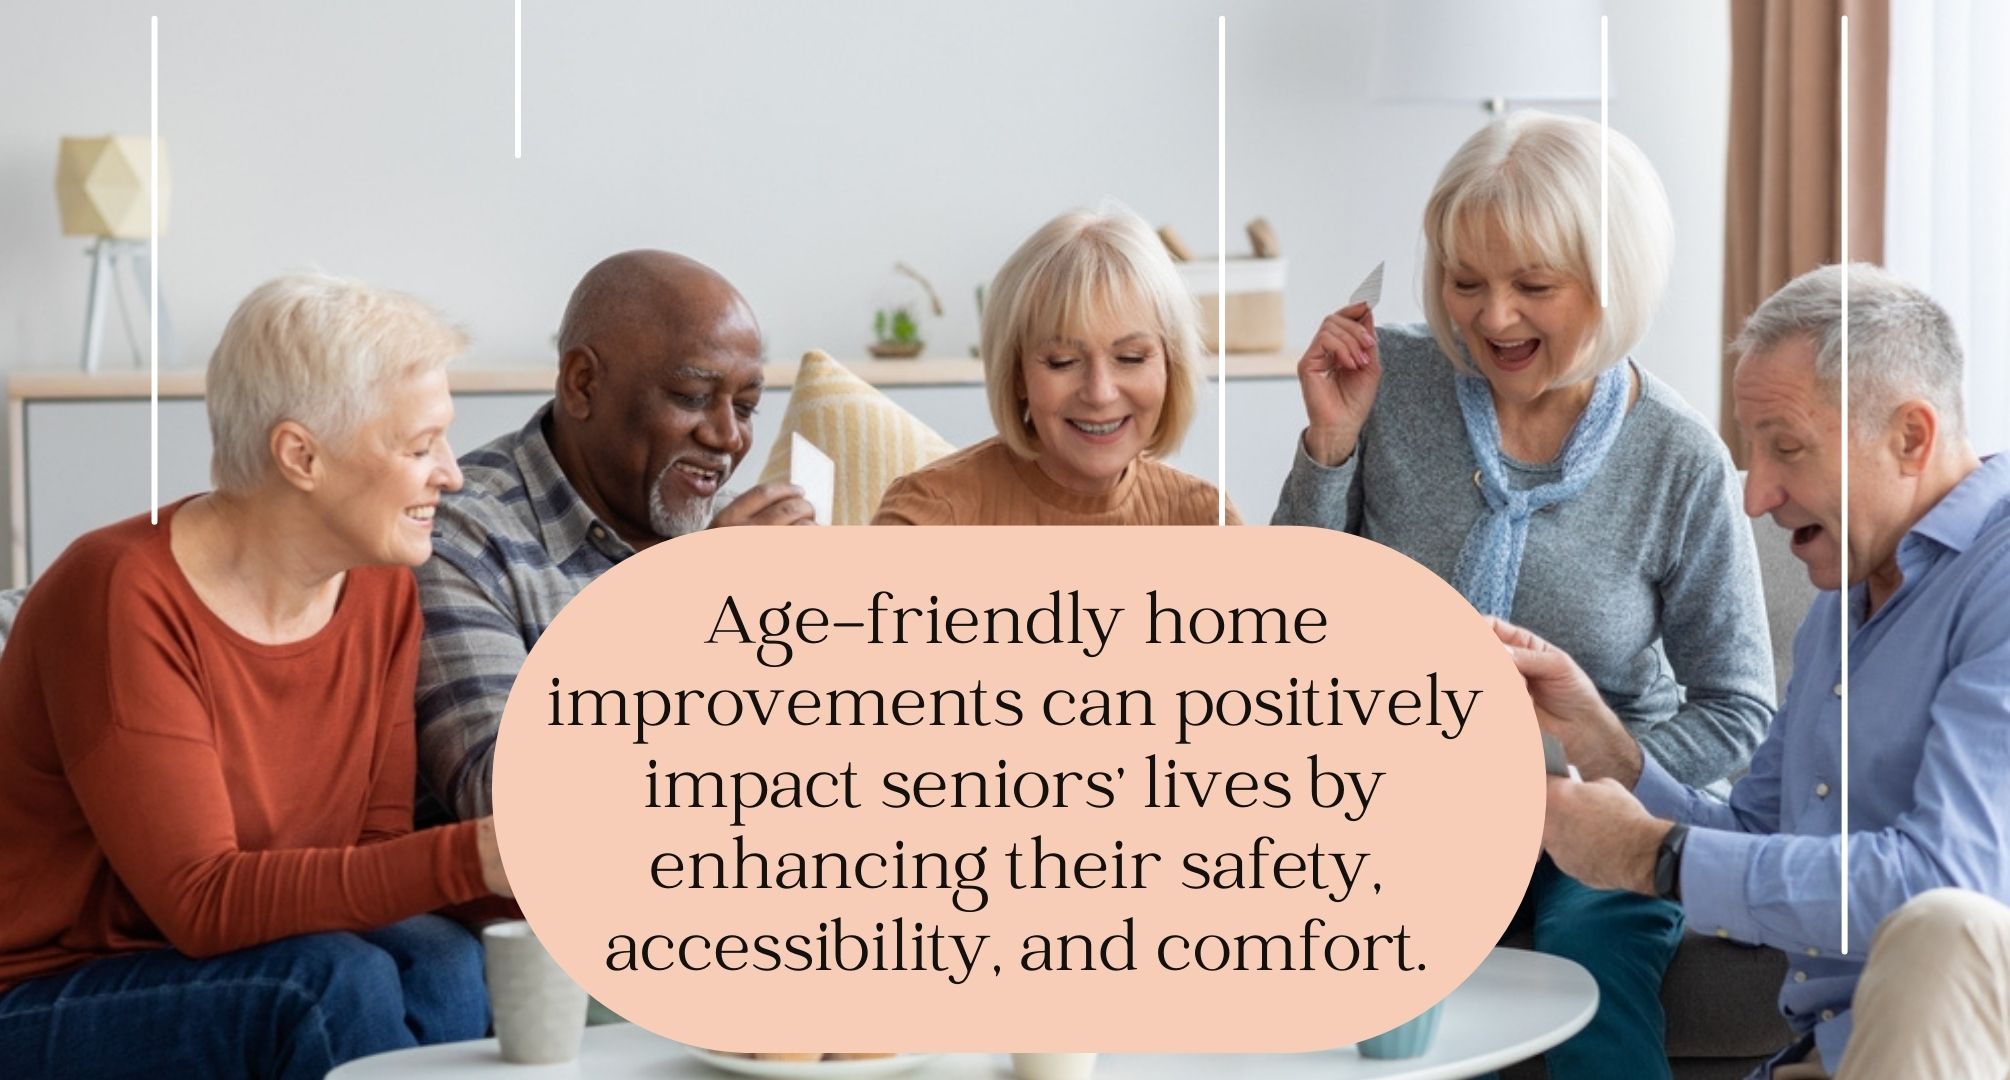 Senior Care Data Promotes the Benefits of Age-Friendly Home Improvements